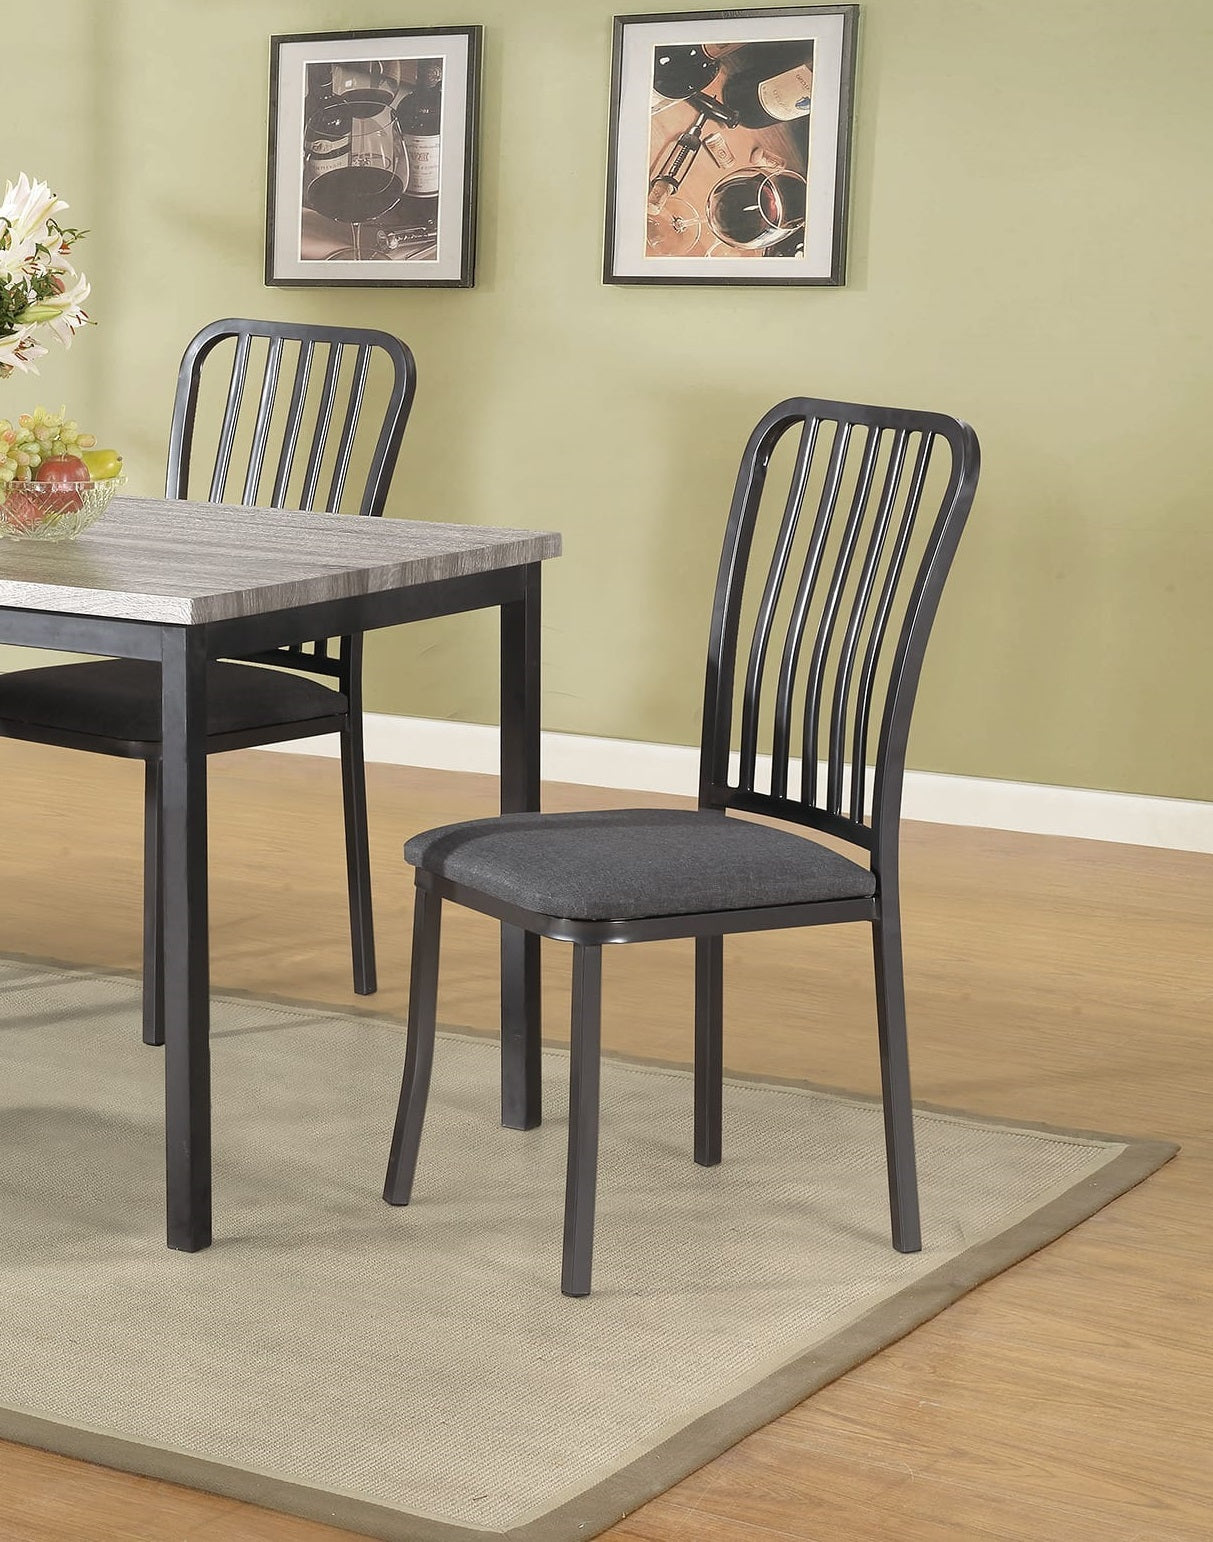 Dinette 5pc Dining Set Table And 4x Chairs Faux Marble gray-seats 4-metal-dining room-48